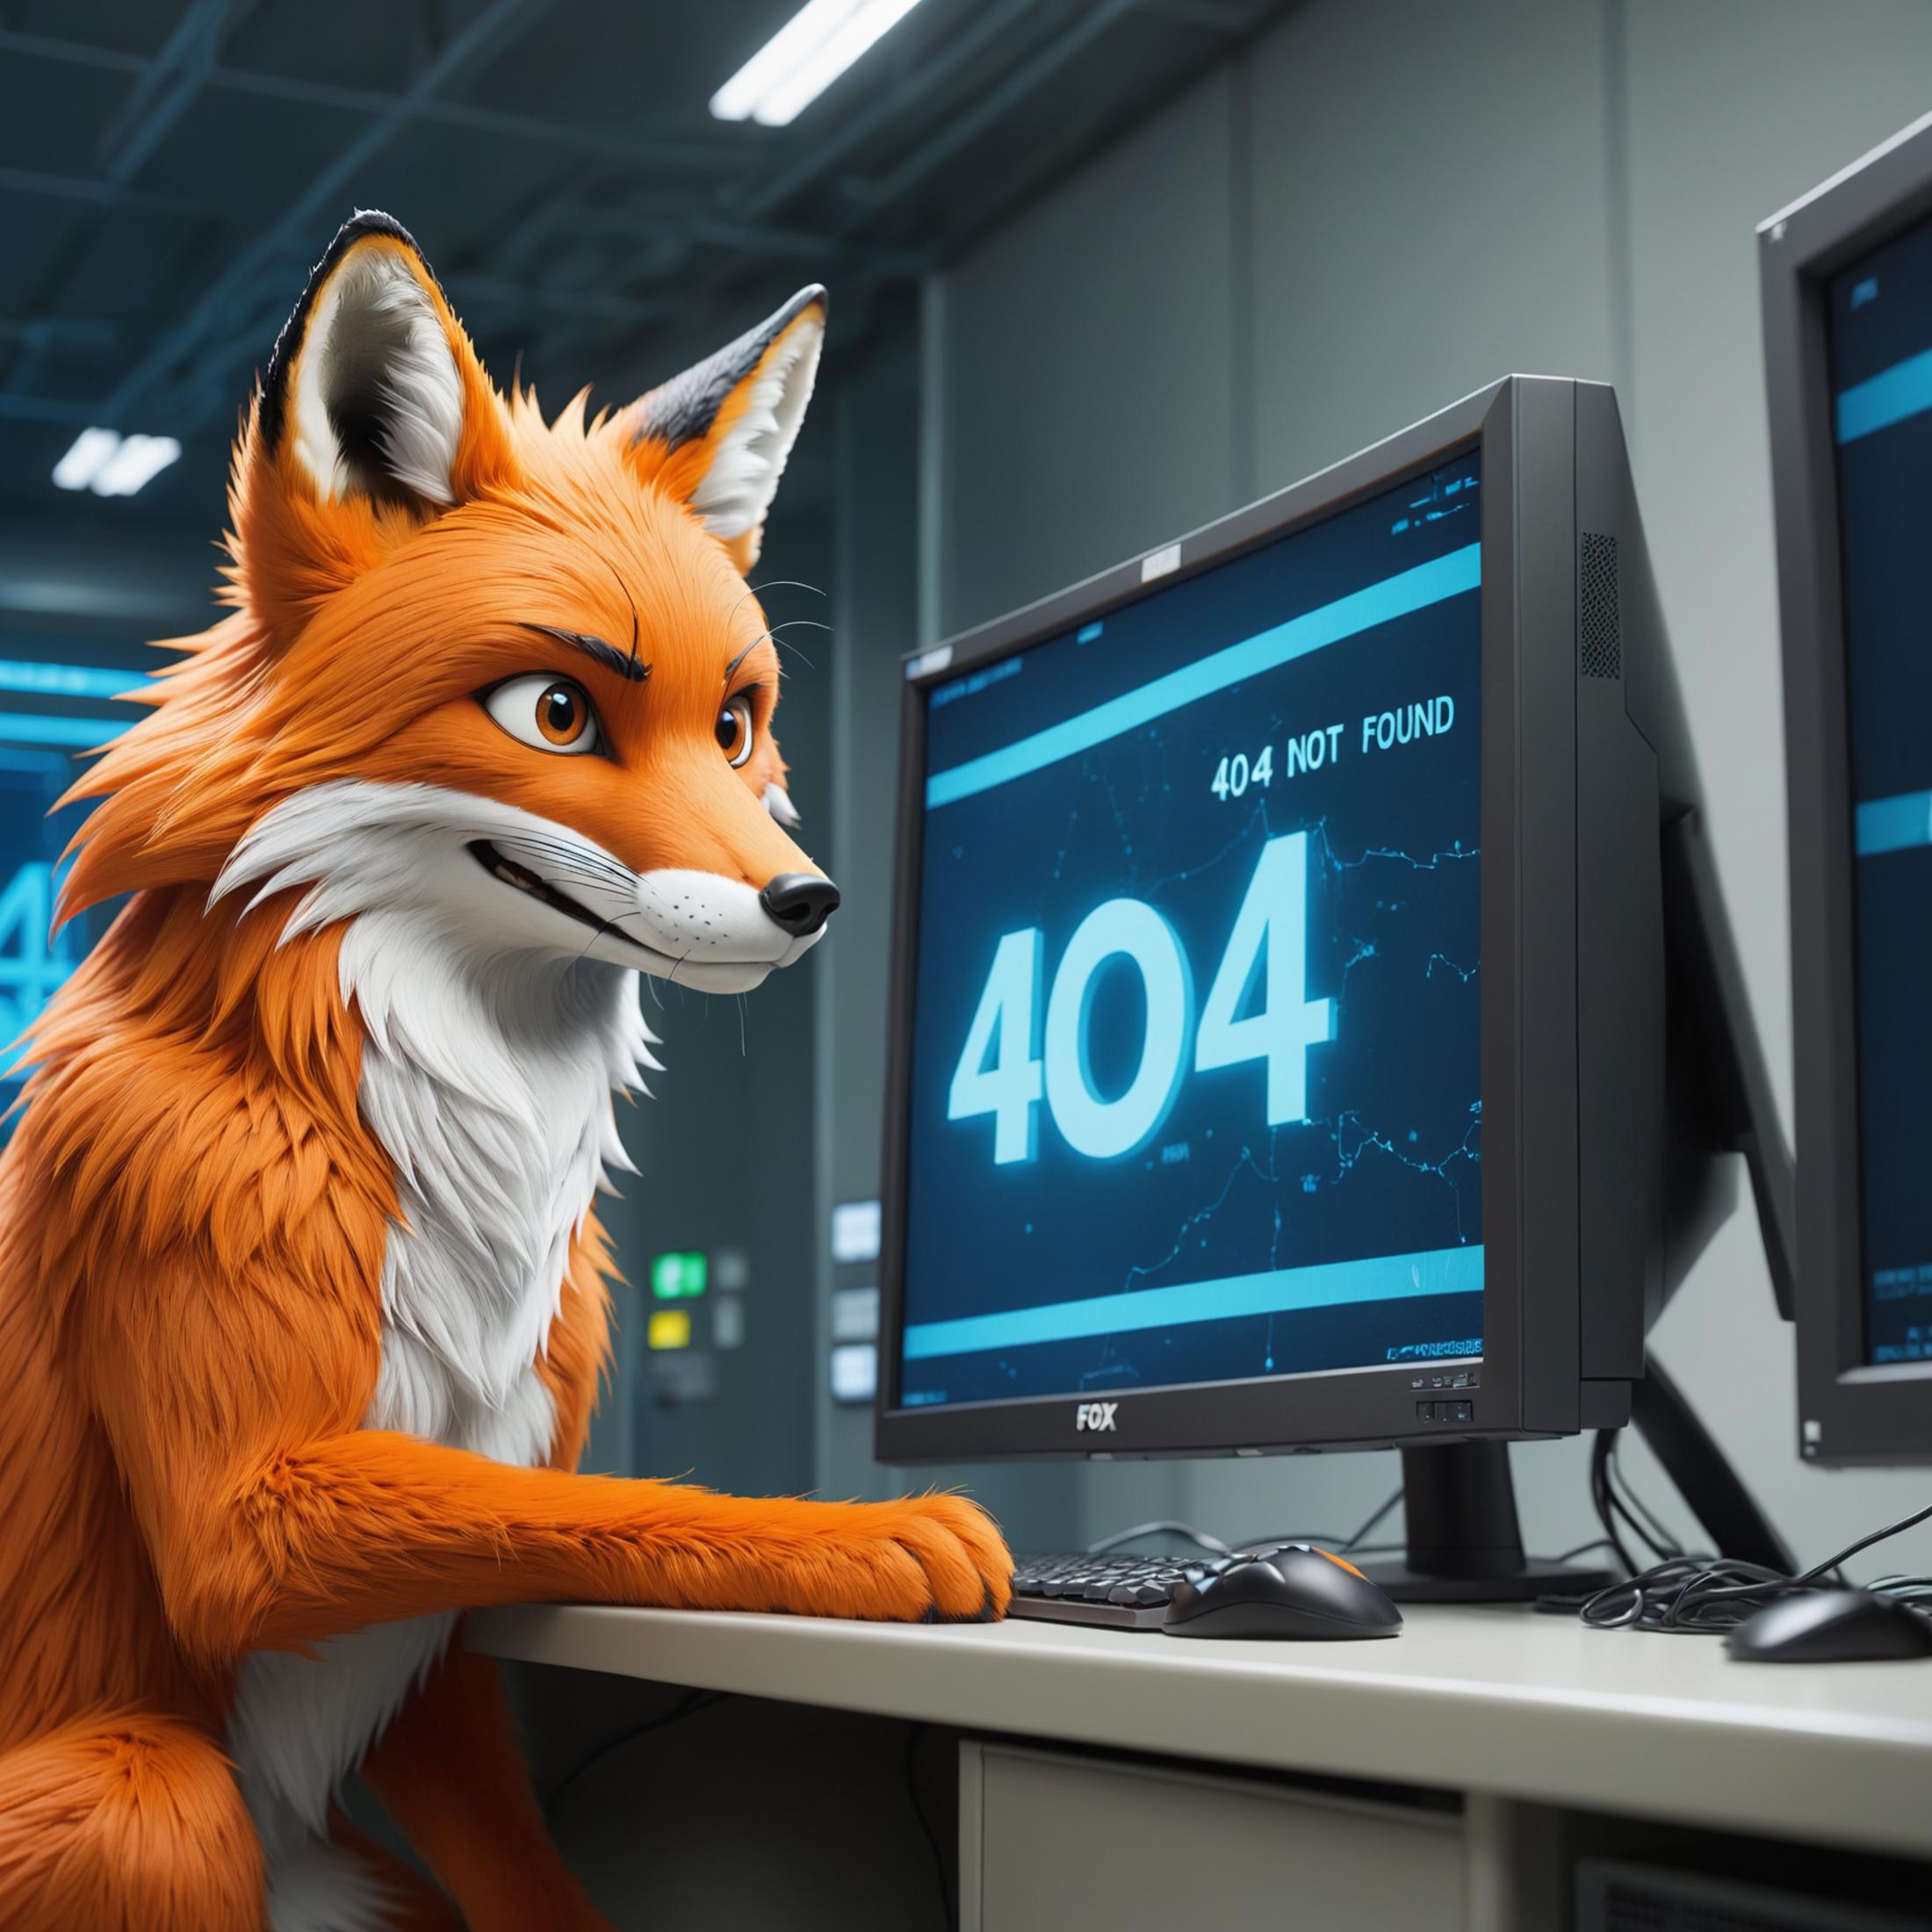 A cartoon fox looking at a computer screen with the message "404 not found".